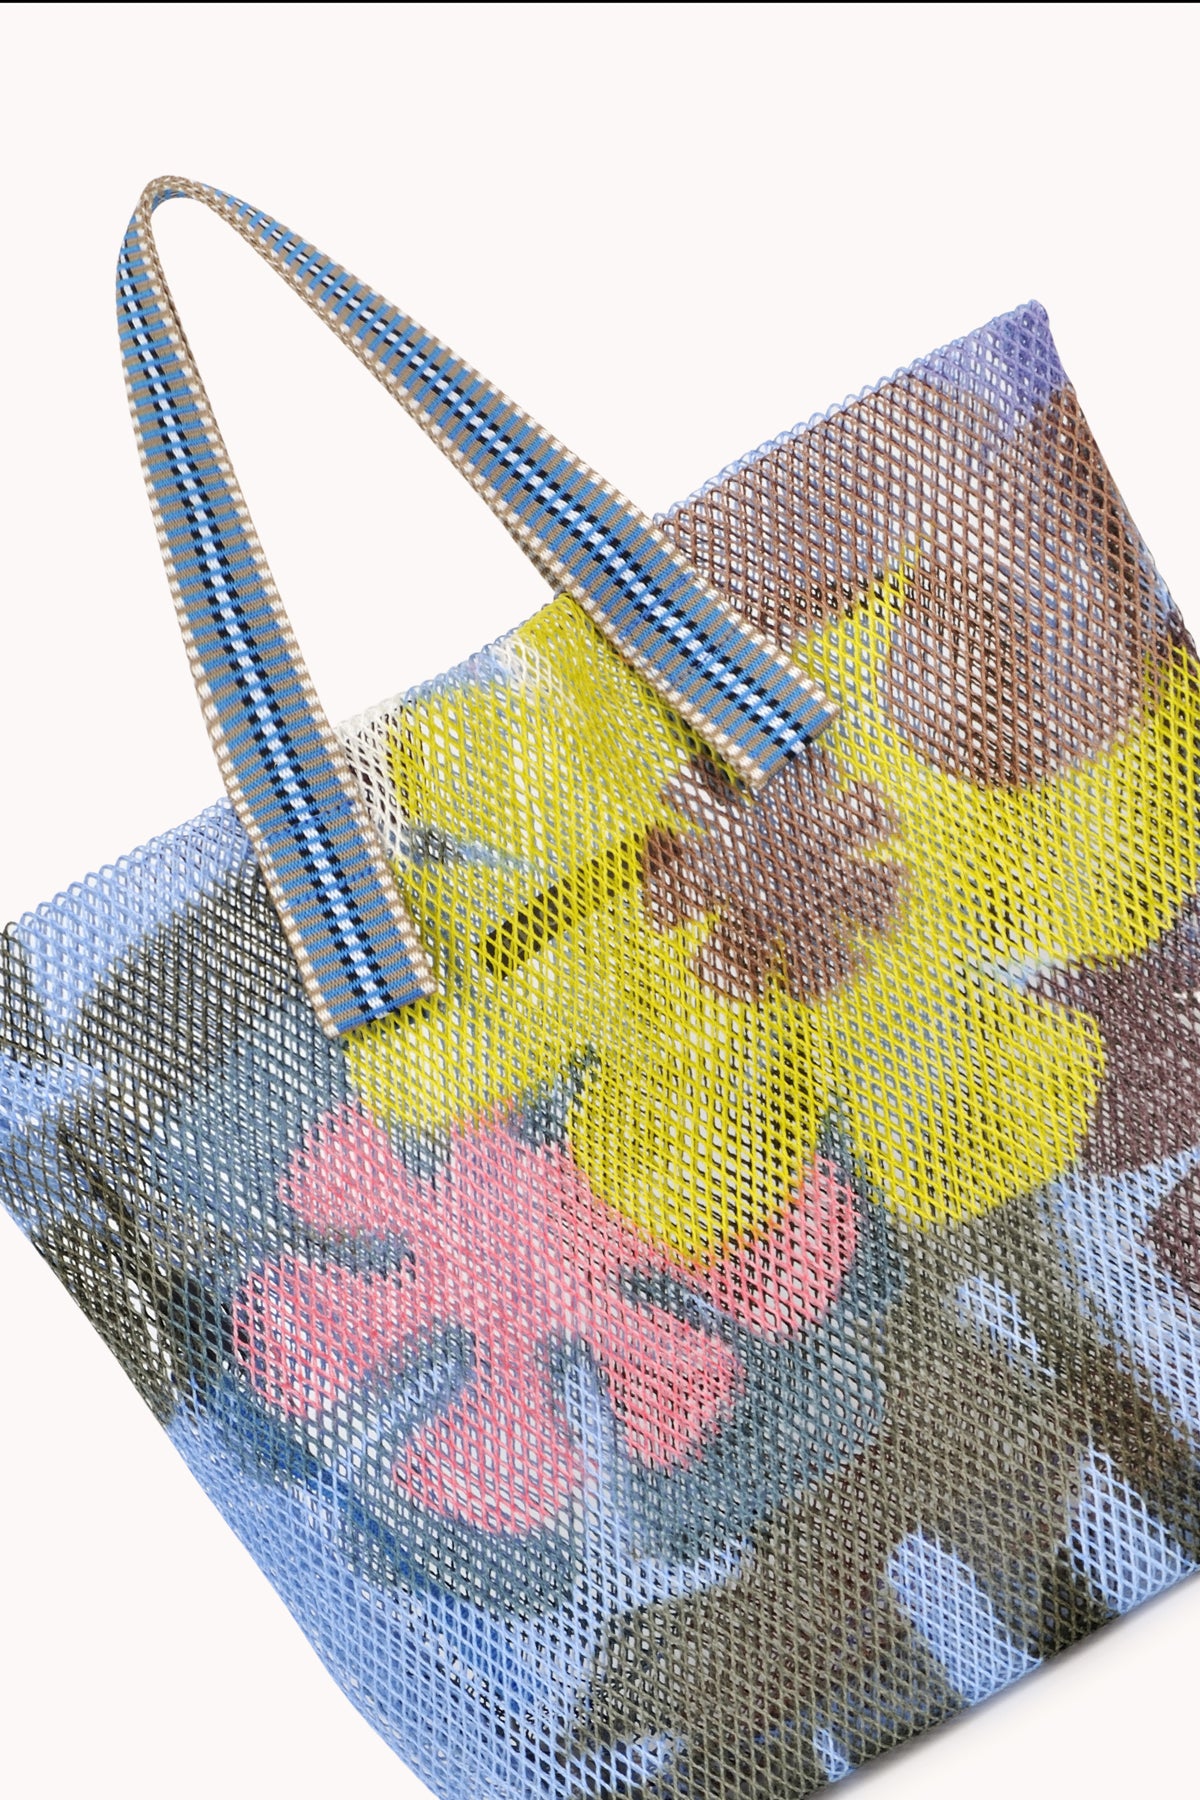   Small mesh tote in blue with multi colored flowers and striped strap. 